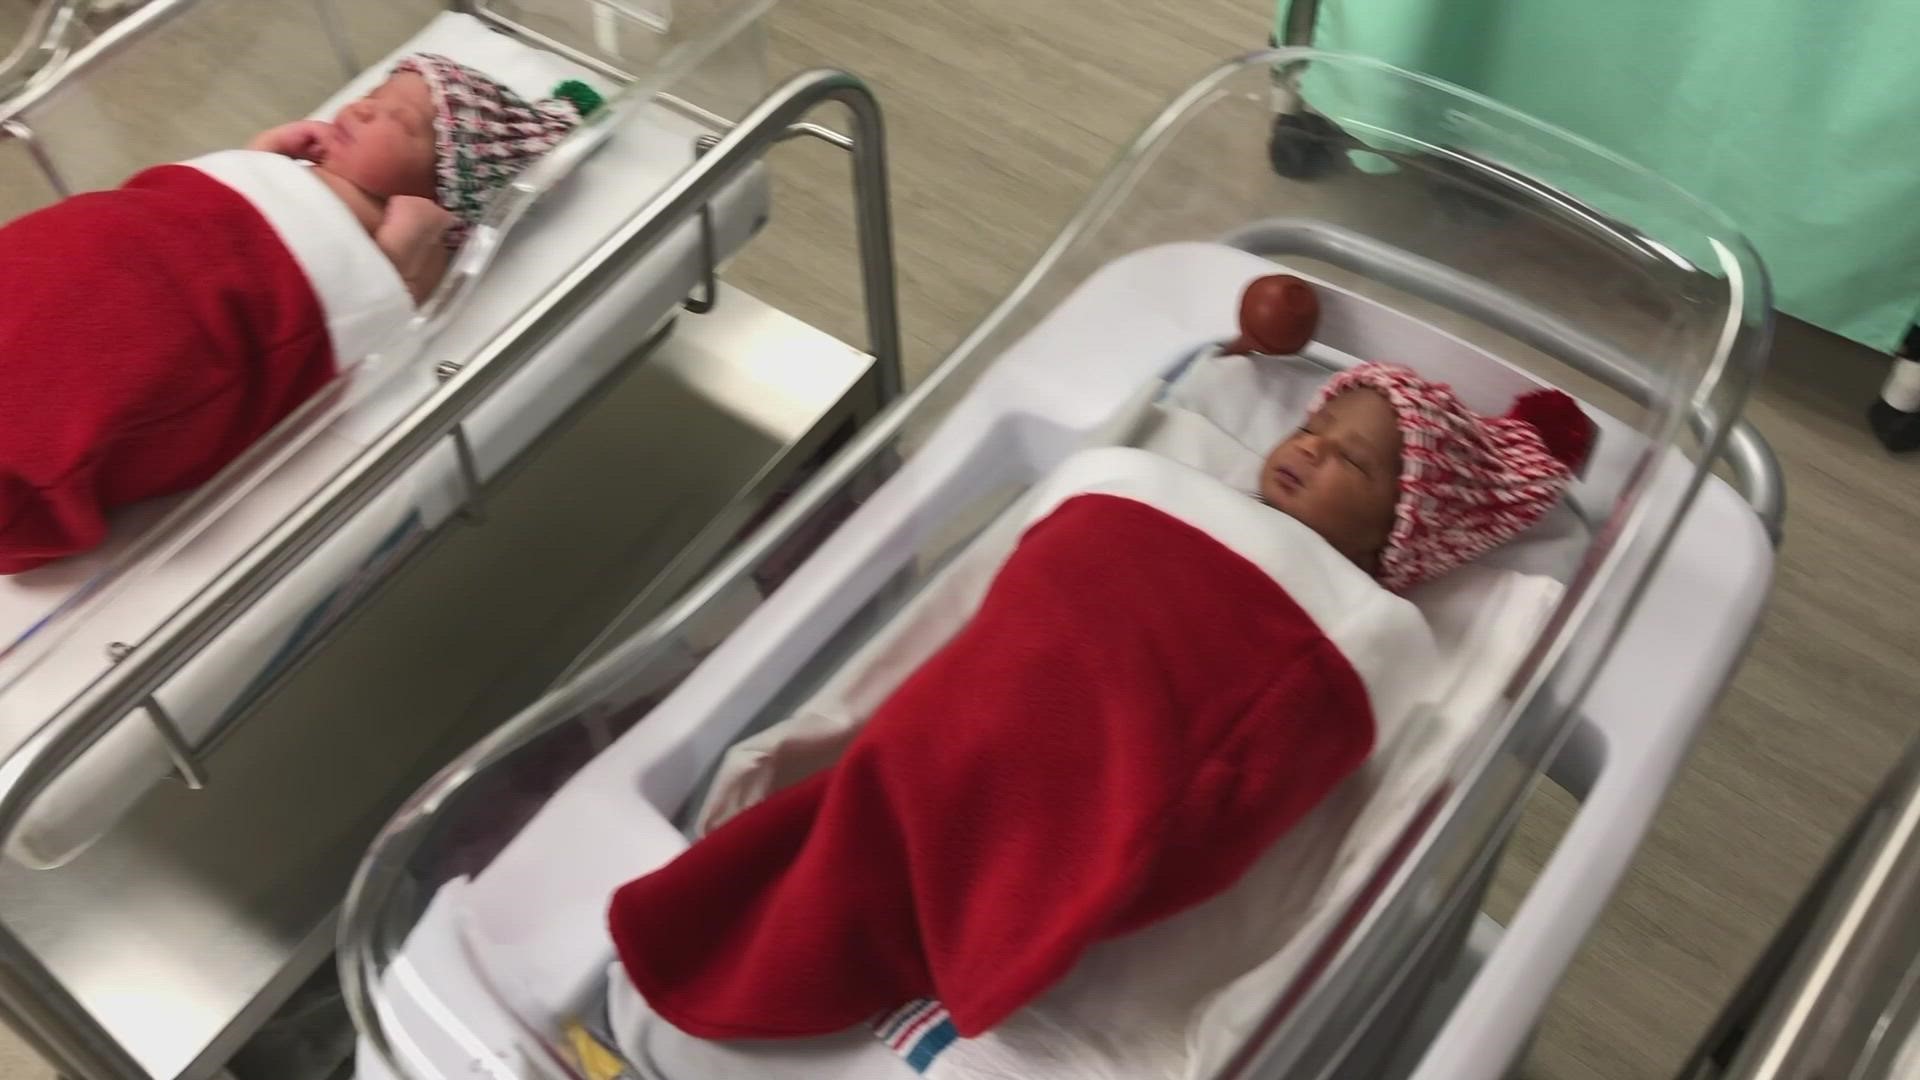 Newborns at Baptist Health Louisville are snuggled in for an extra festive long winter’s nap this Christmas.